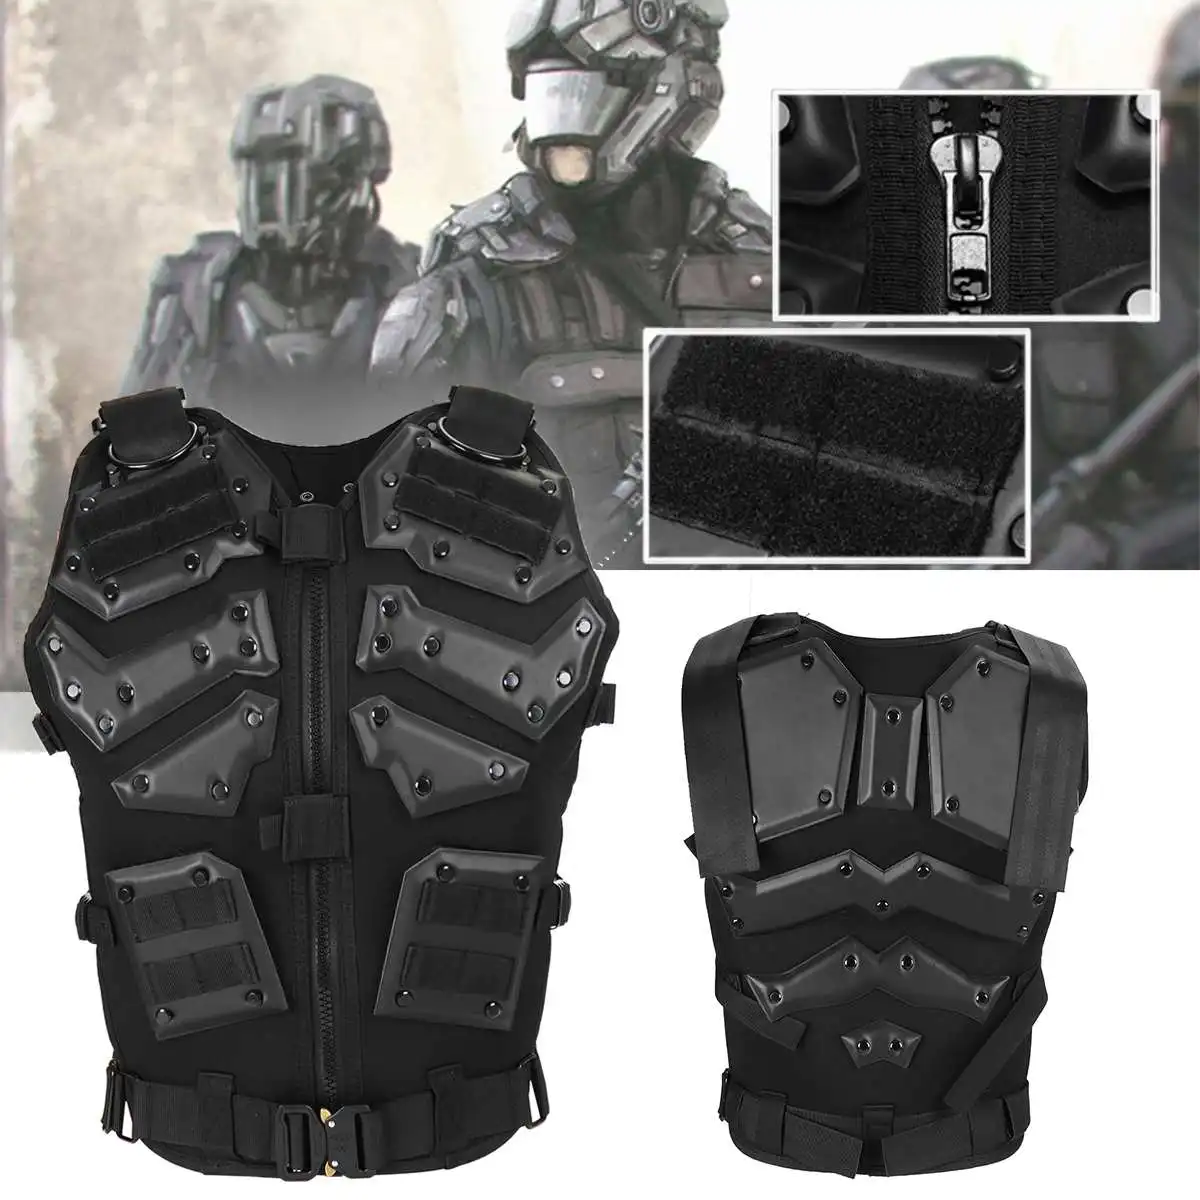 

New Tactical Vest Multi-functional Tactical Body Armor Outdoor Airsoft Paintball Training CS Protection Equipment Molle Vests